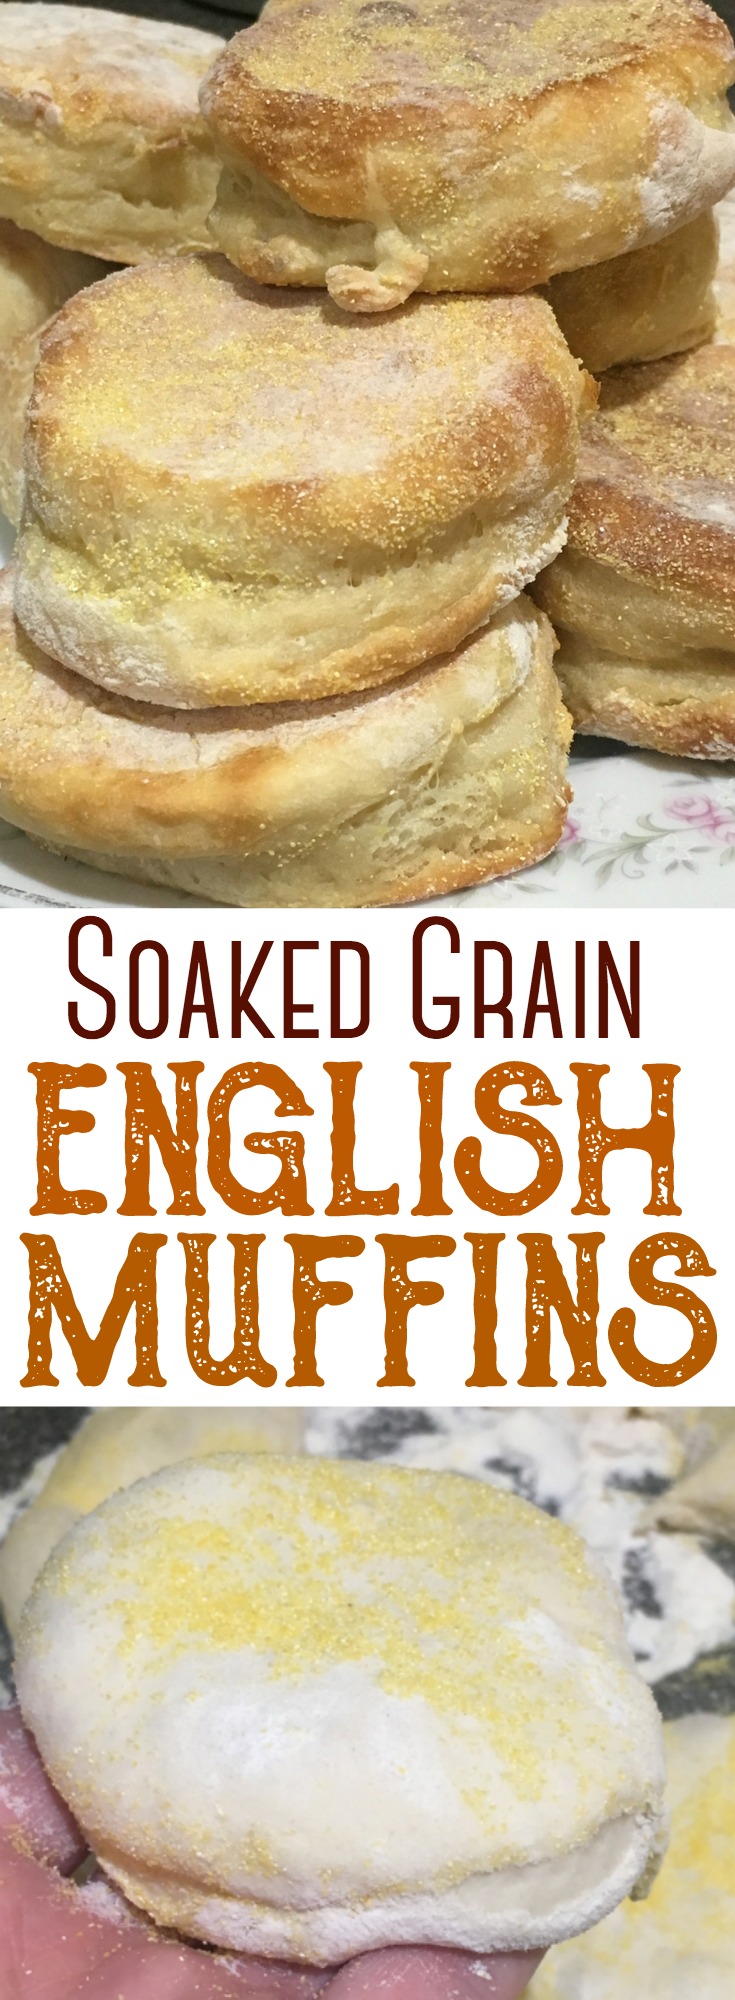 These soaked grain english muffins are a testament to traditional food preparation. Combine simple ingredients, soaked over time, to produce a wonderful, homemade english muffin that your family will love! #englishmuffins #soakedgrains #traditional #breadmaking #rawmilk